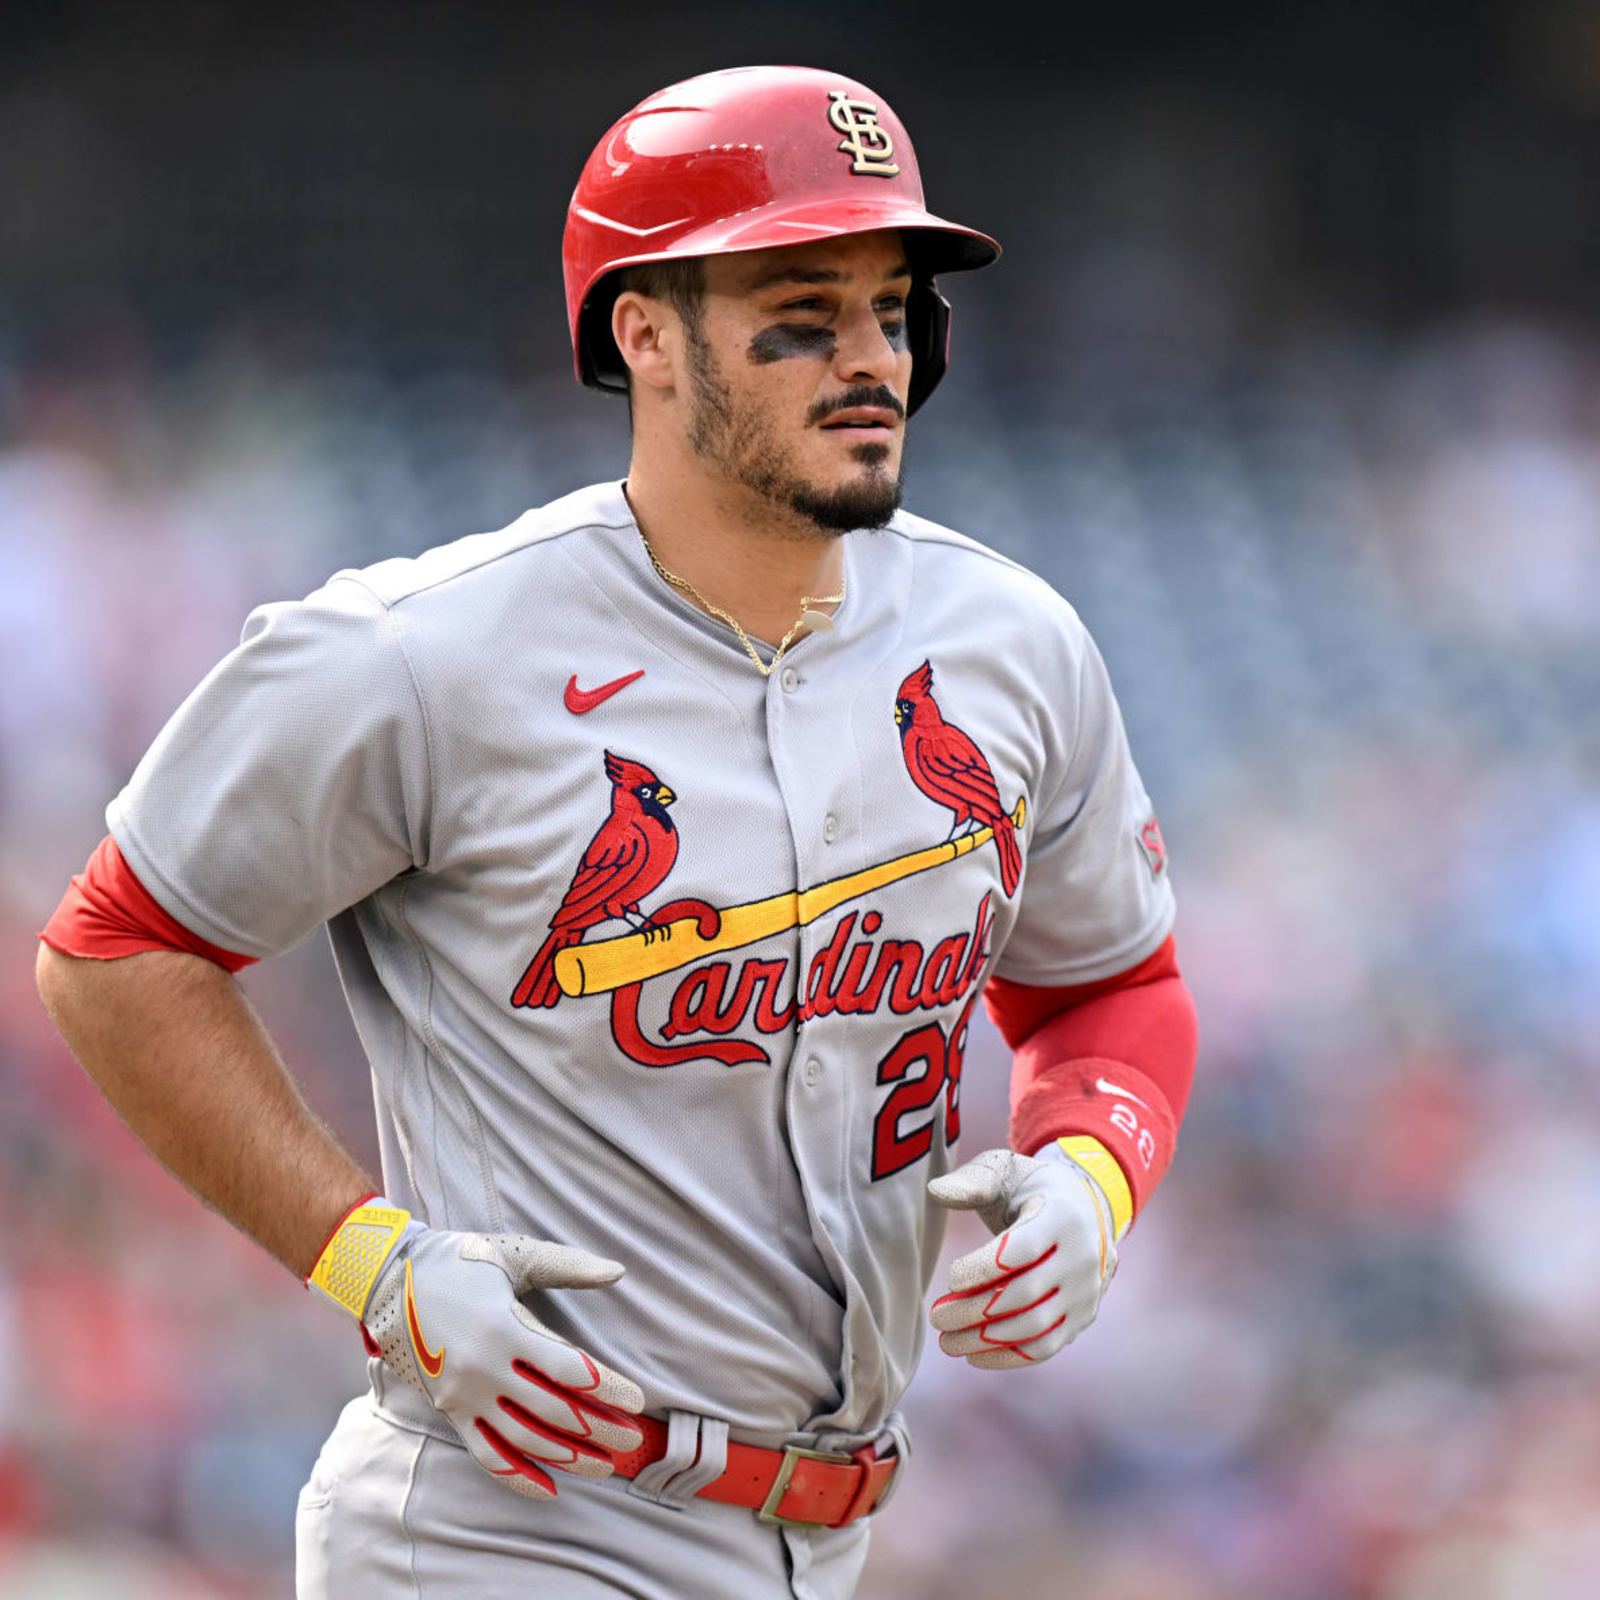 Could Cardinals' disaster lead to this Nolan Arenado-Dodgers trade package?